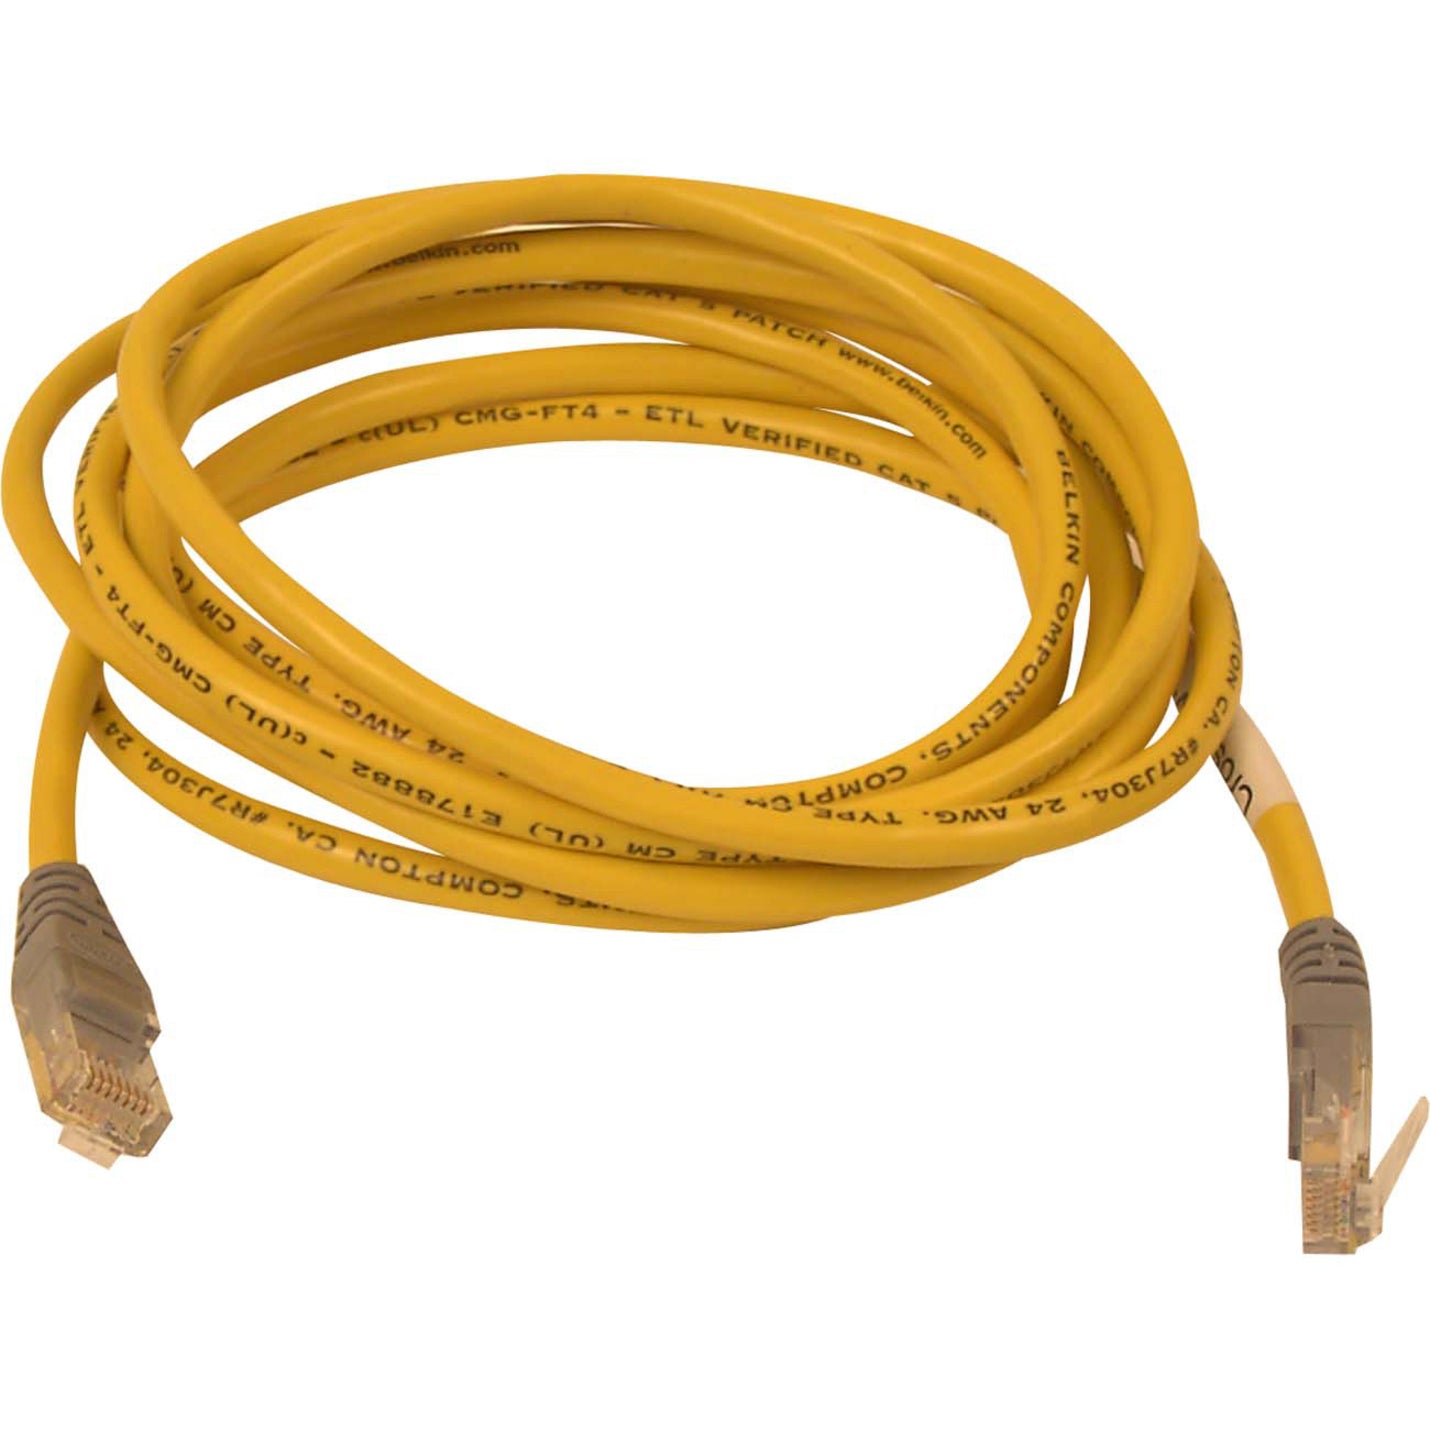 Belkin A3X126-07-YLW-M Cat5e Crossover Cable 7 ft Yellow Lifetime Warranty  ベルキン A3X126-07-YLW-M Cat5e クロスオーバーケーブル、7 フィート、イエロー、ライフタイム保証  ブランド名: ベルキン  猫5e クロスオーバーケーブル (Cat5e Crossover Cable)